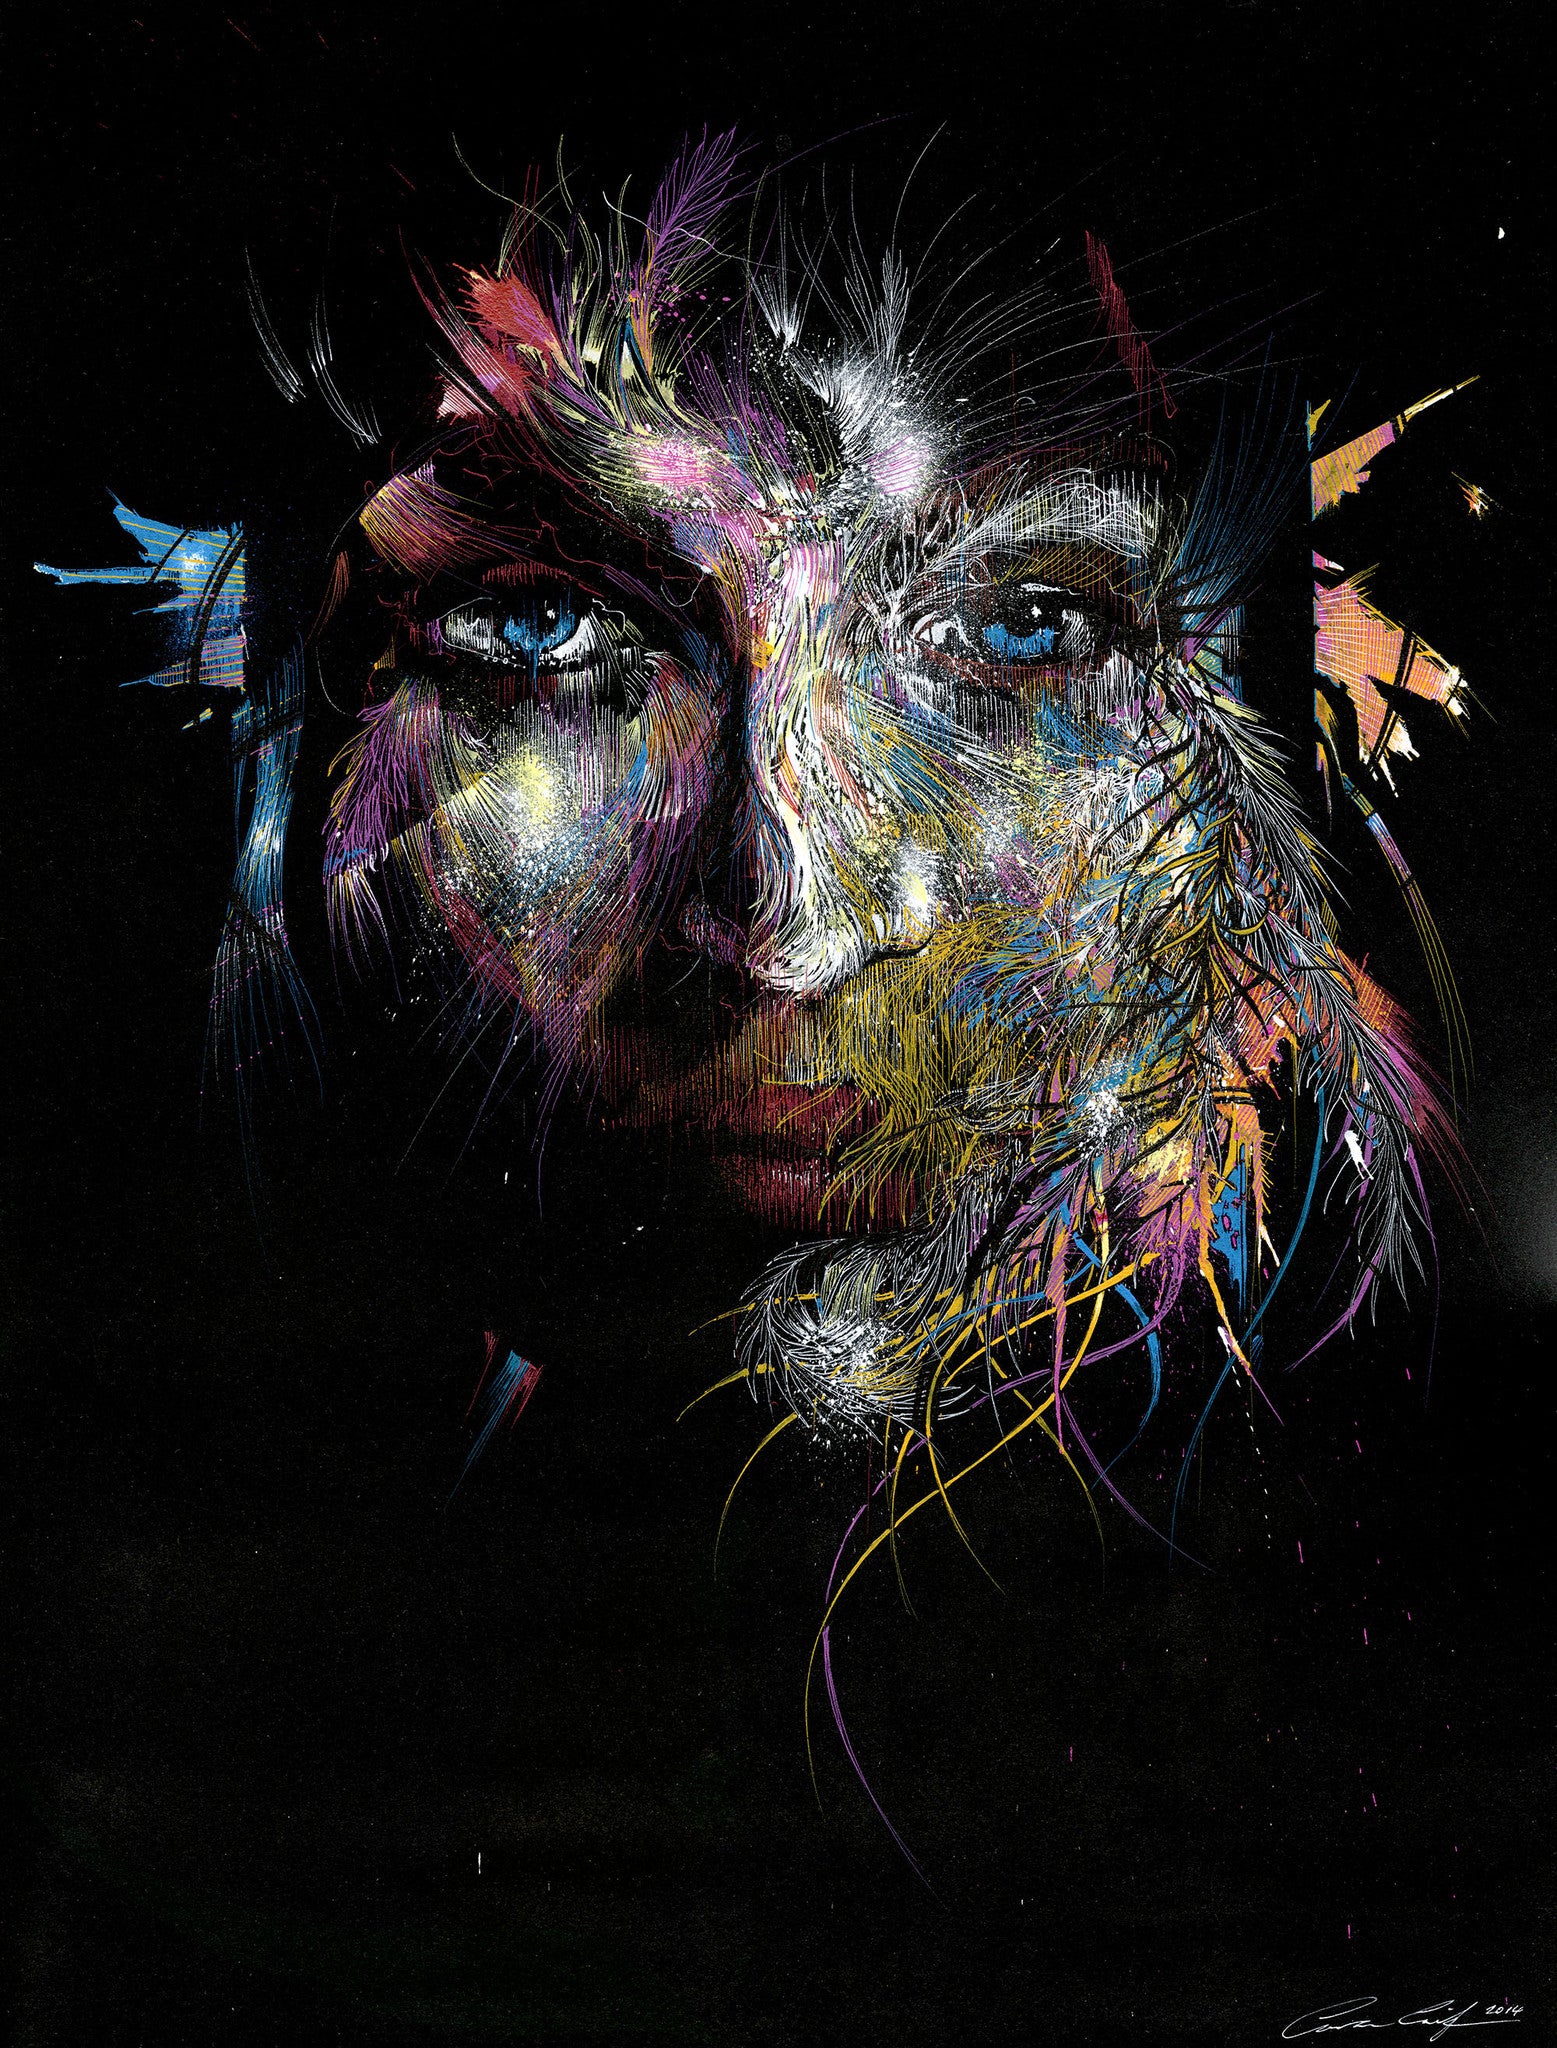 “THE VOID” CARNE GRIFFITHS